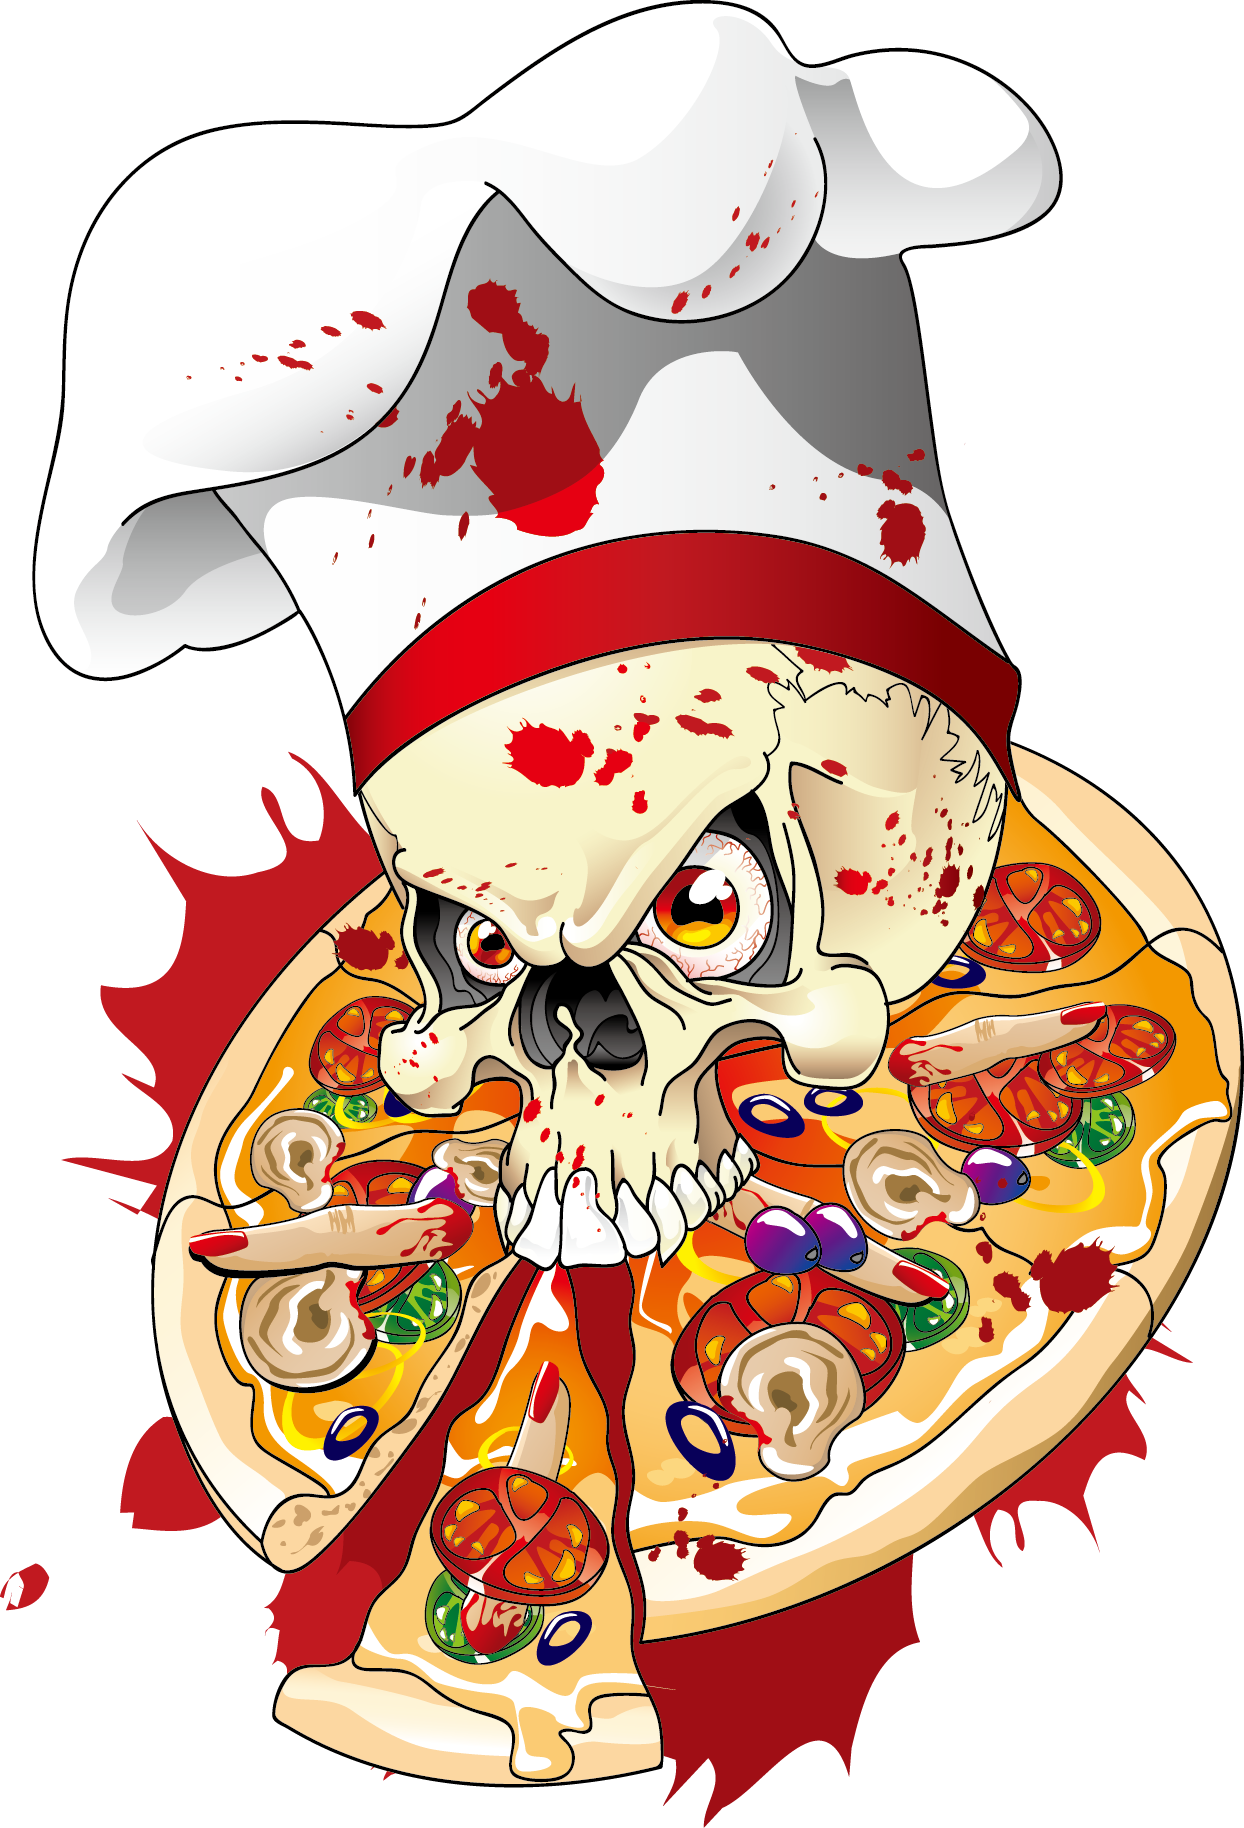 On Skull Illustration Delivery The Pizza Clipart